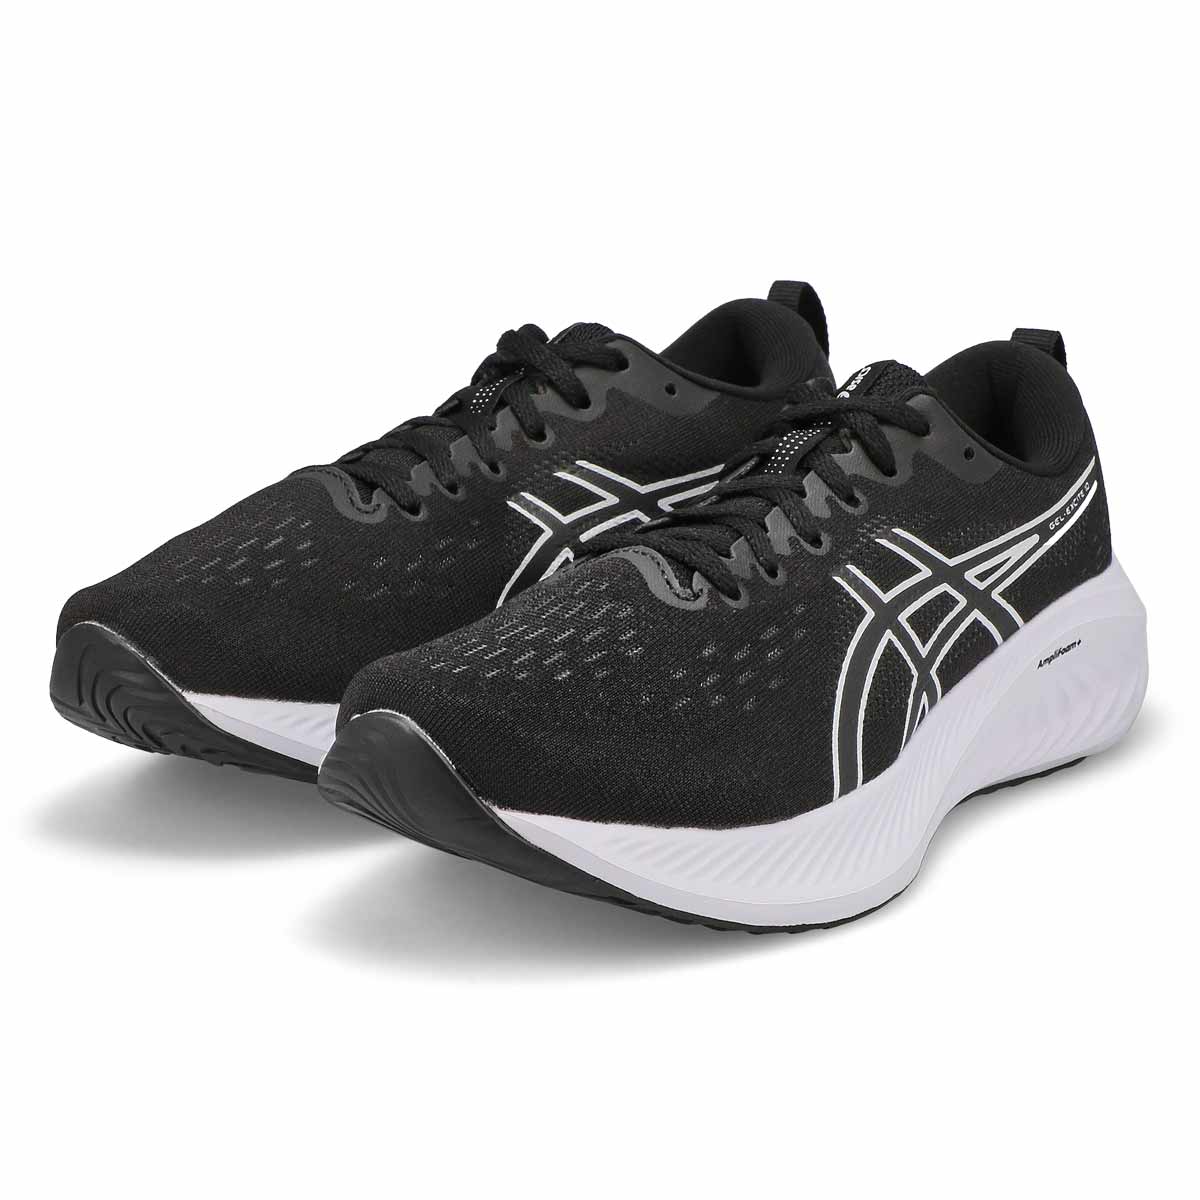 ASICS Ladies Gel Excite 10 Wide Lace Up Sneak | SoftMoc.com